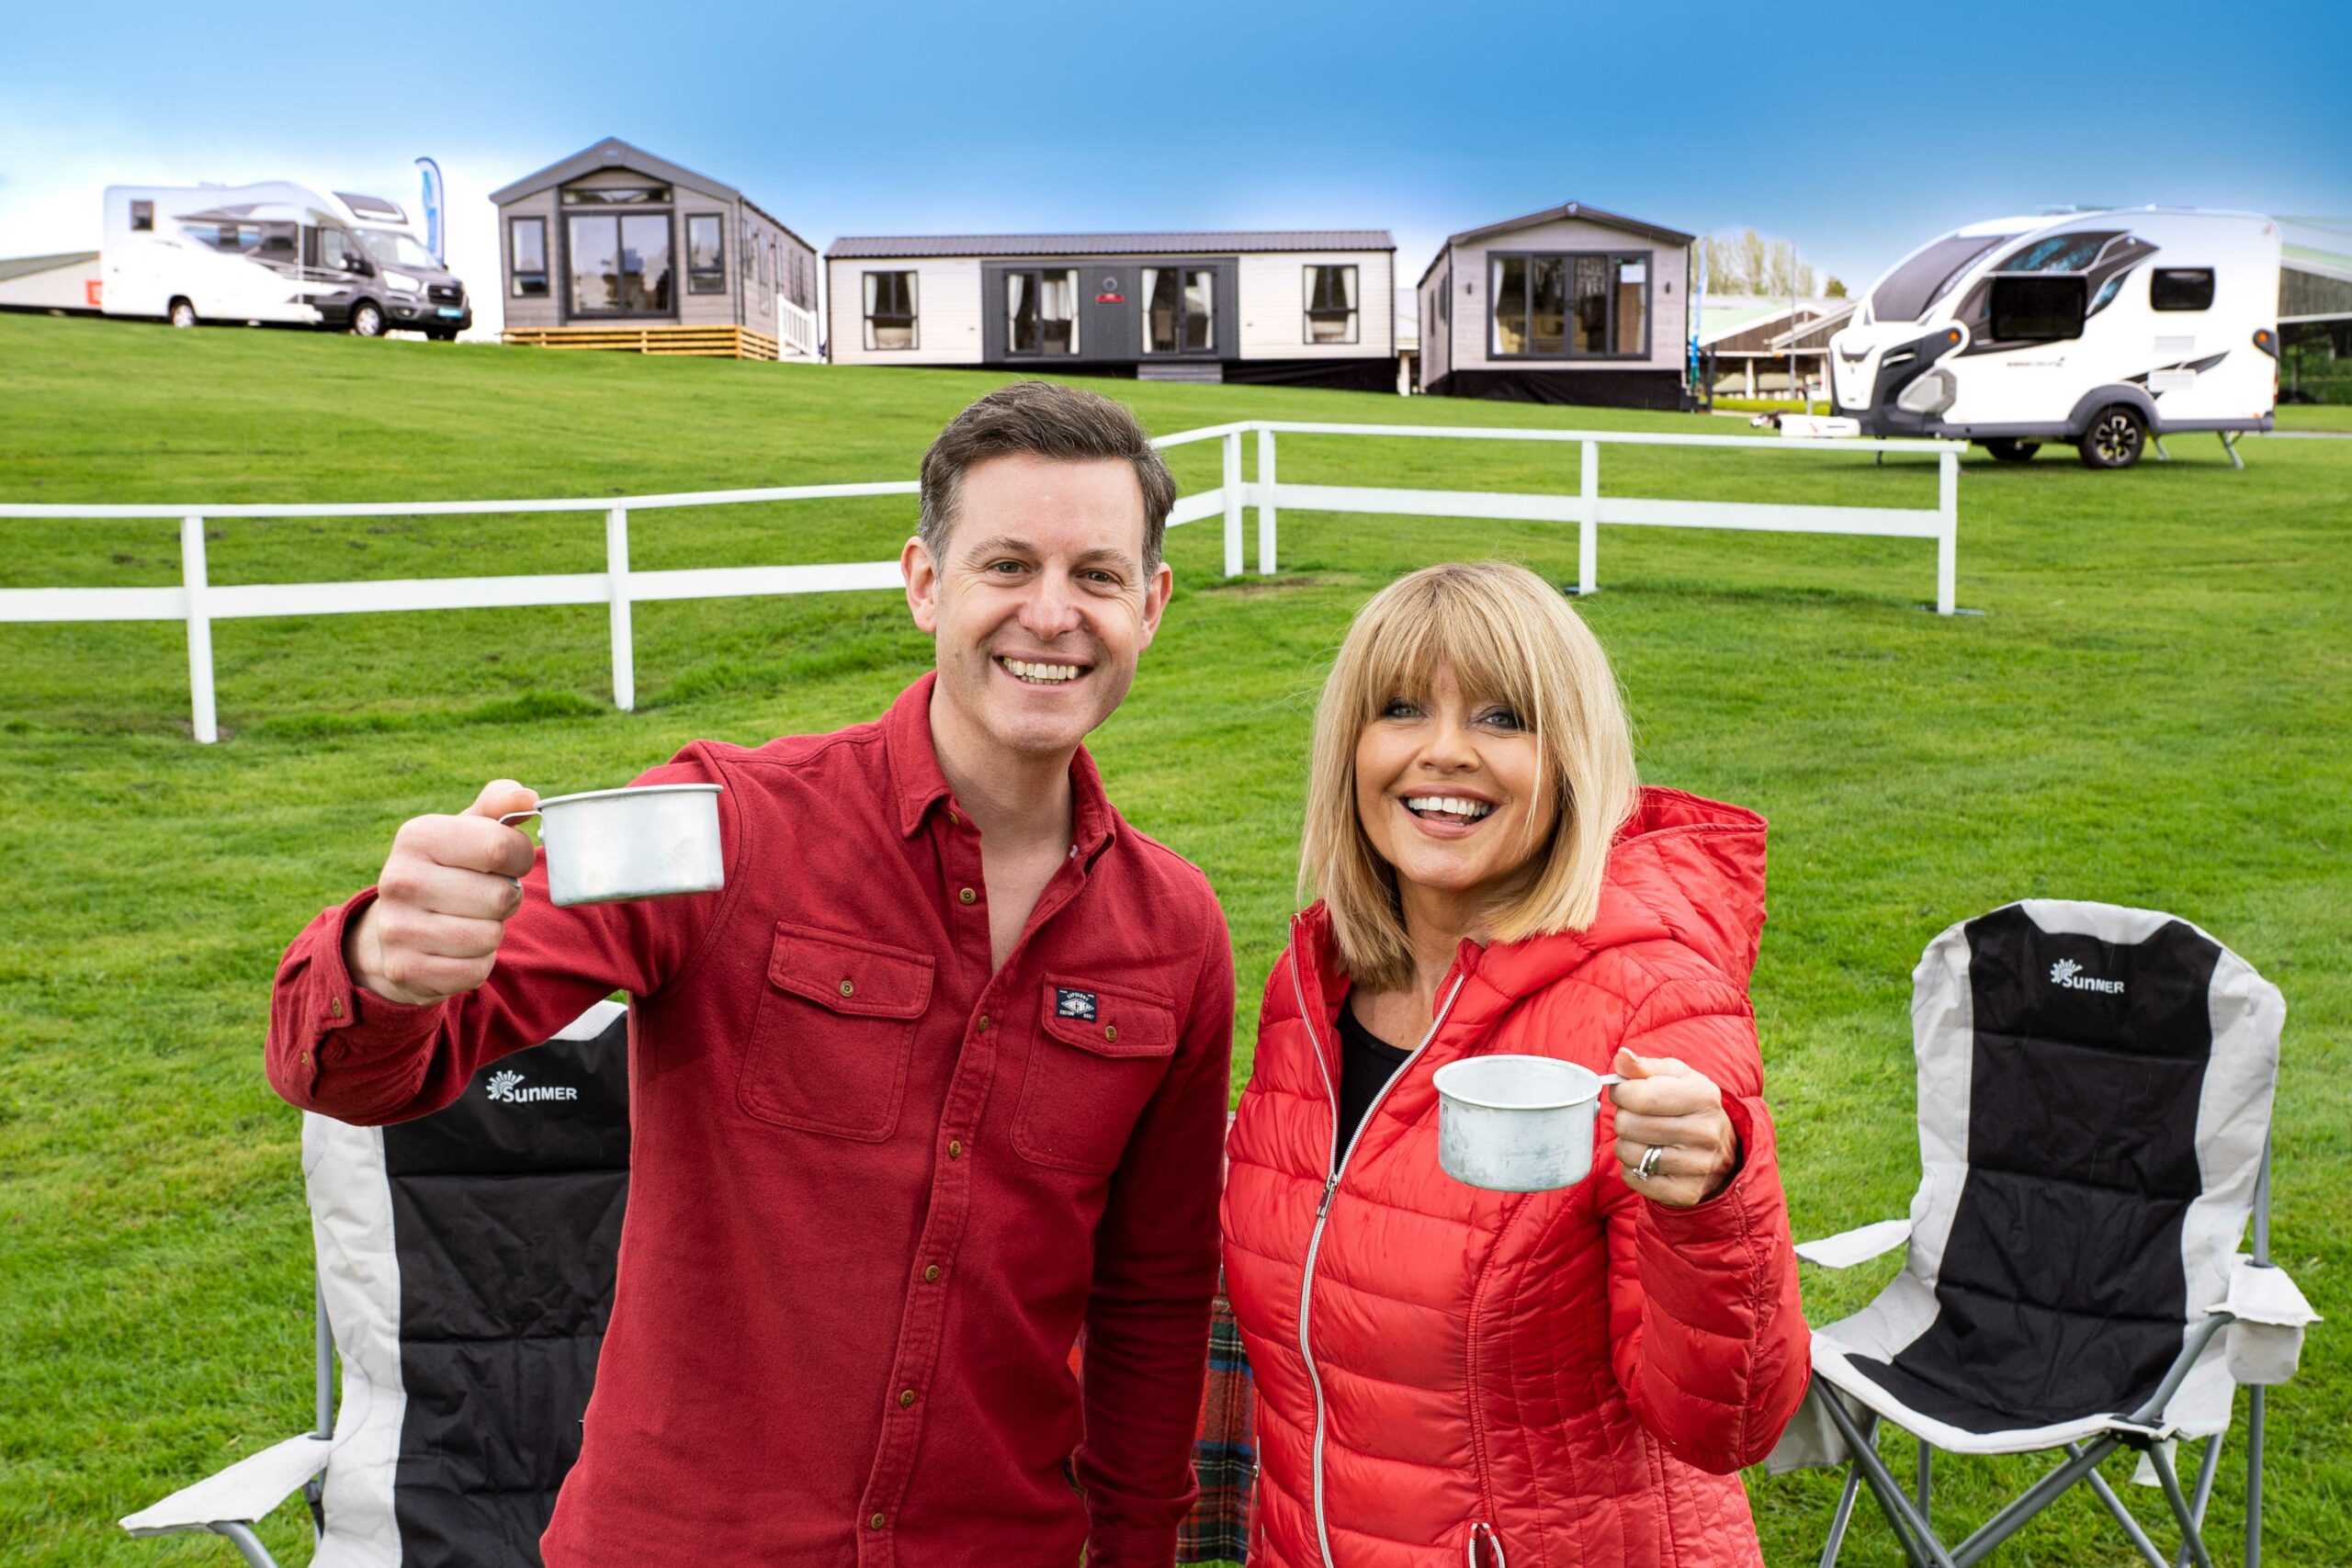 TV STARS PITCH UP TO LAUNCH UK’S BIGGEST OUTDOOR  HOLIDAY HOME SHOW